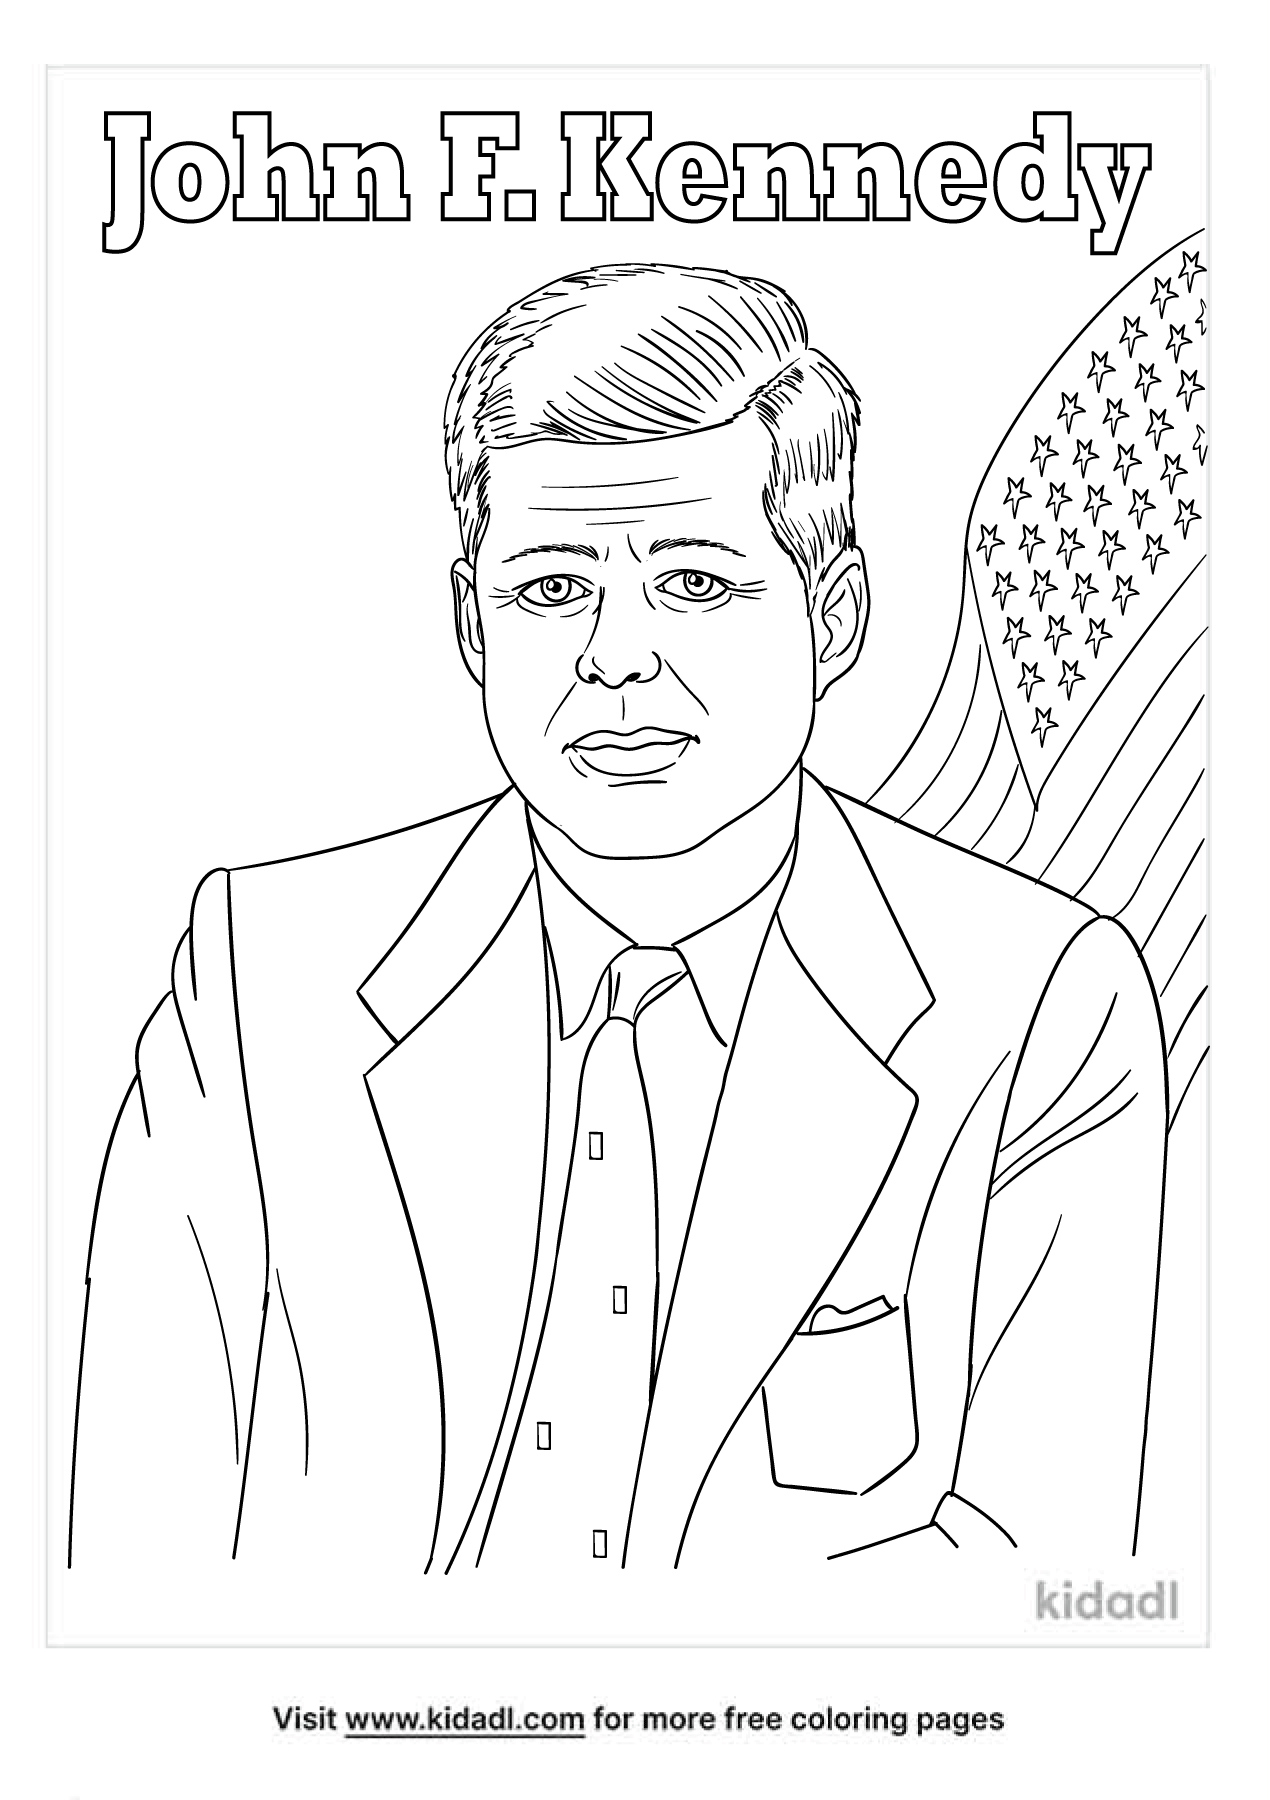 John F Kennedy Coloring Pages | Free People-and-celebrities Coloring Pages  | Kidadl